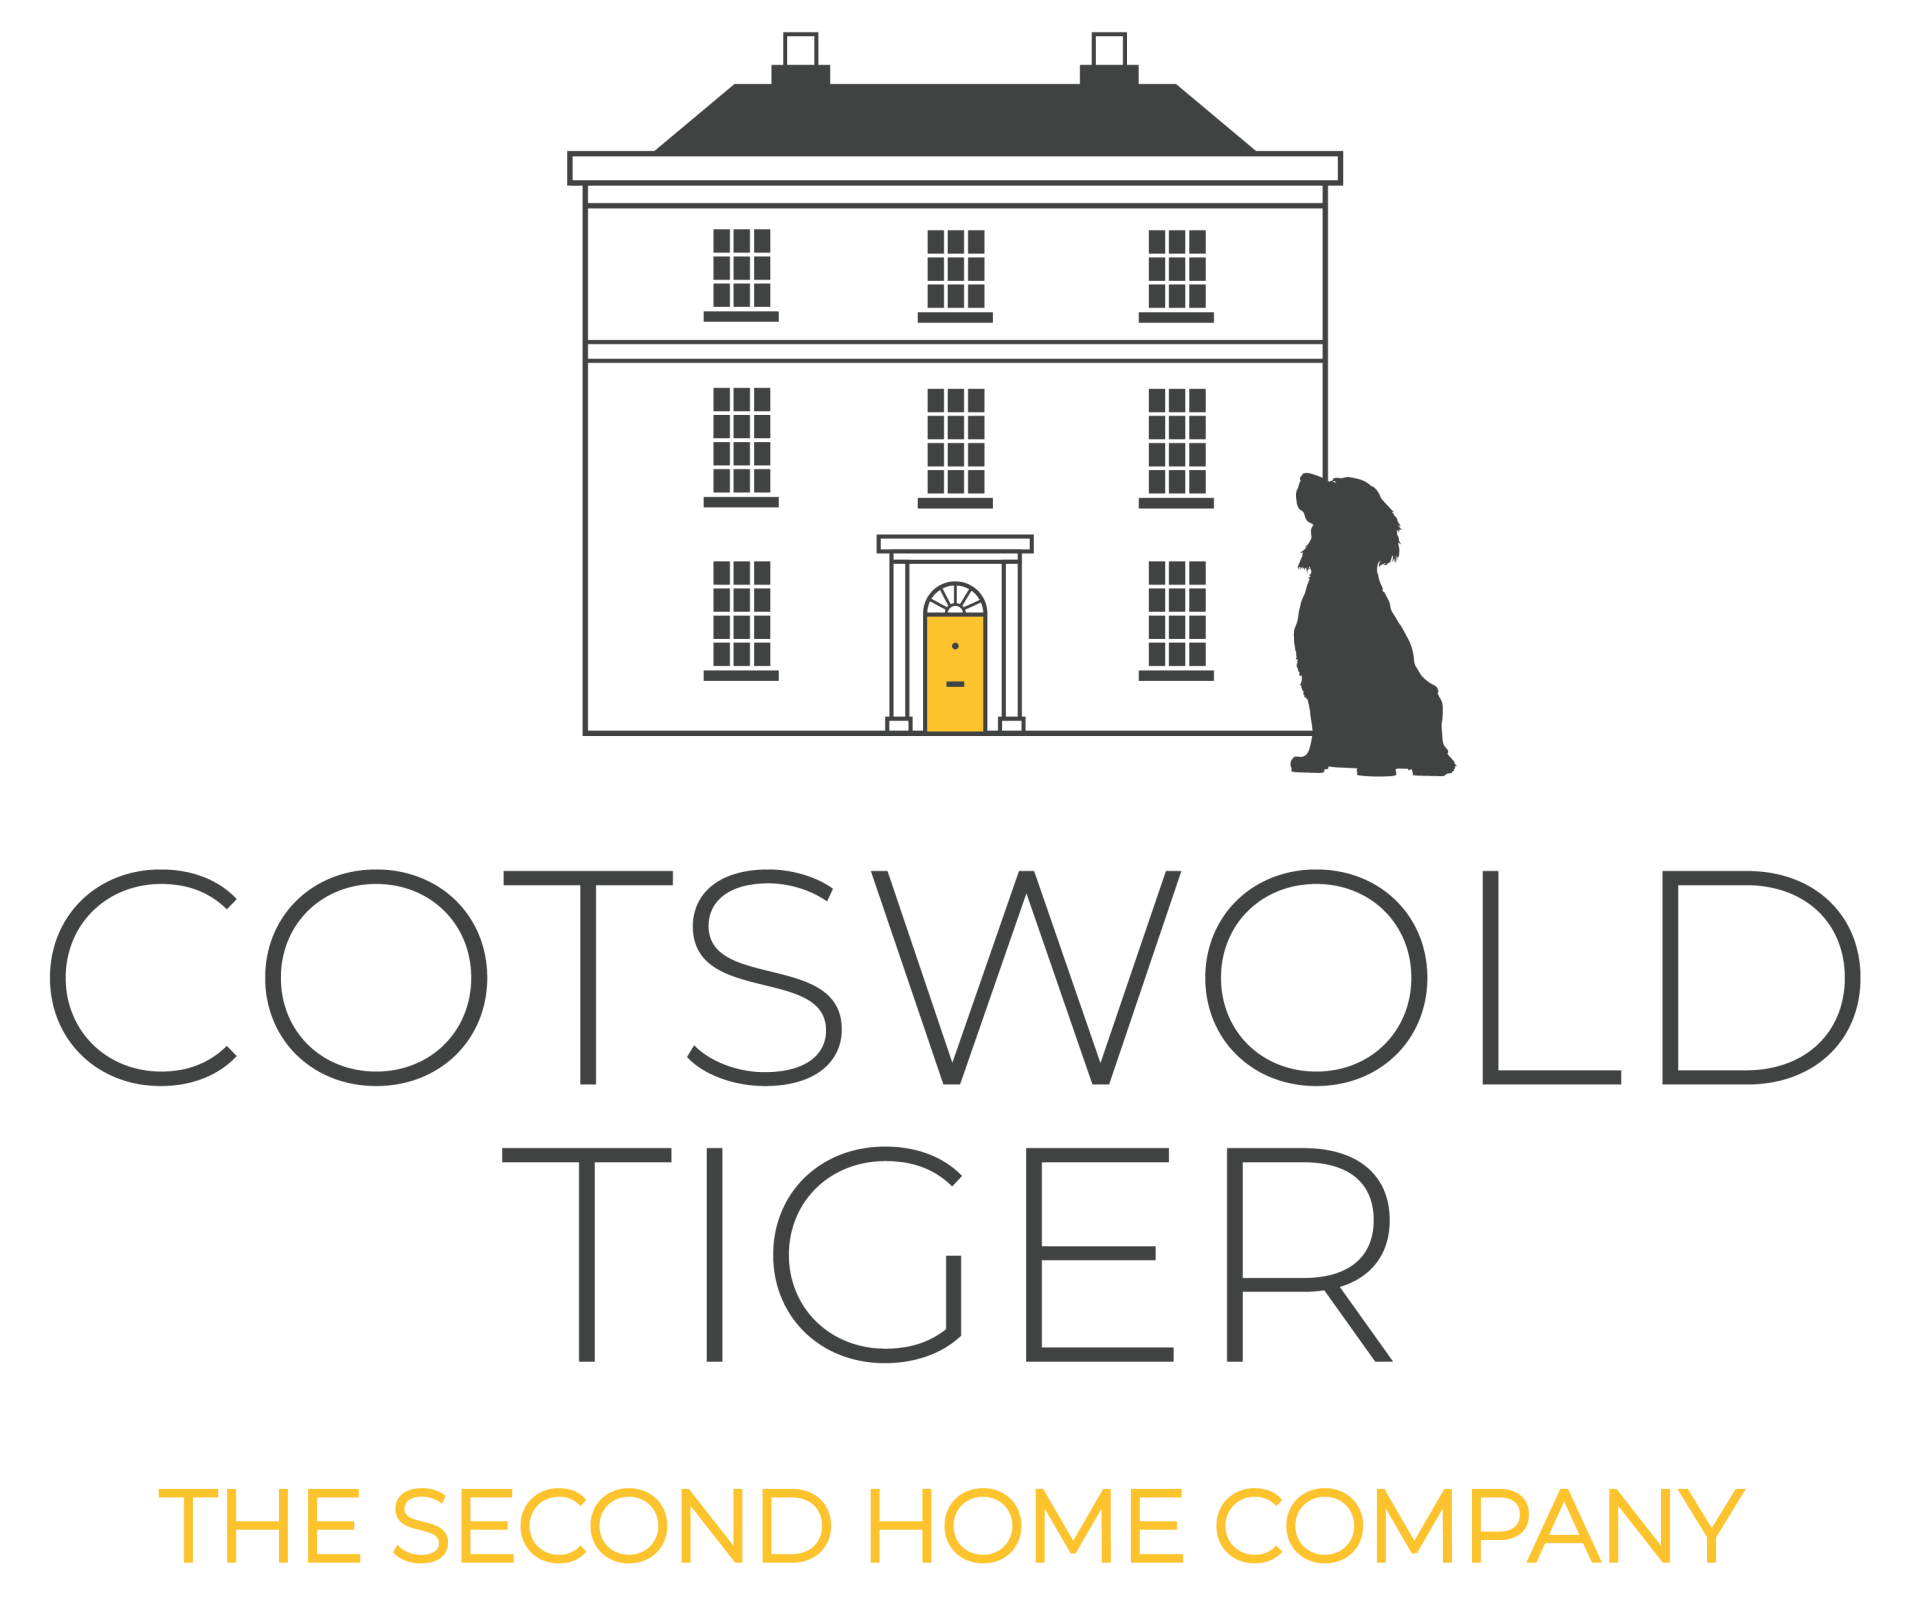 Cotswold Tiger, The Second Home Company logo